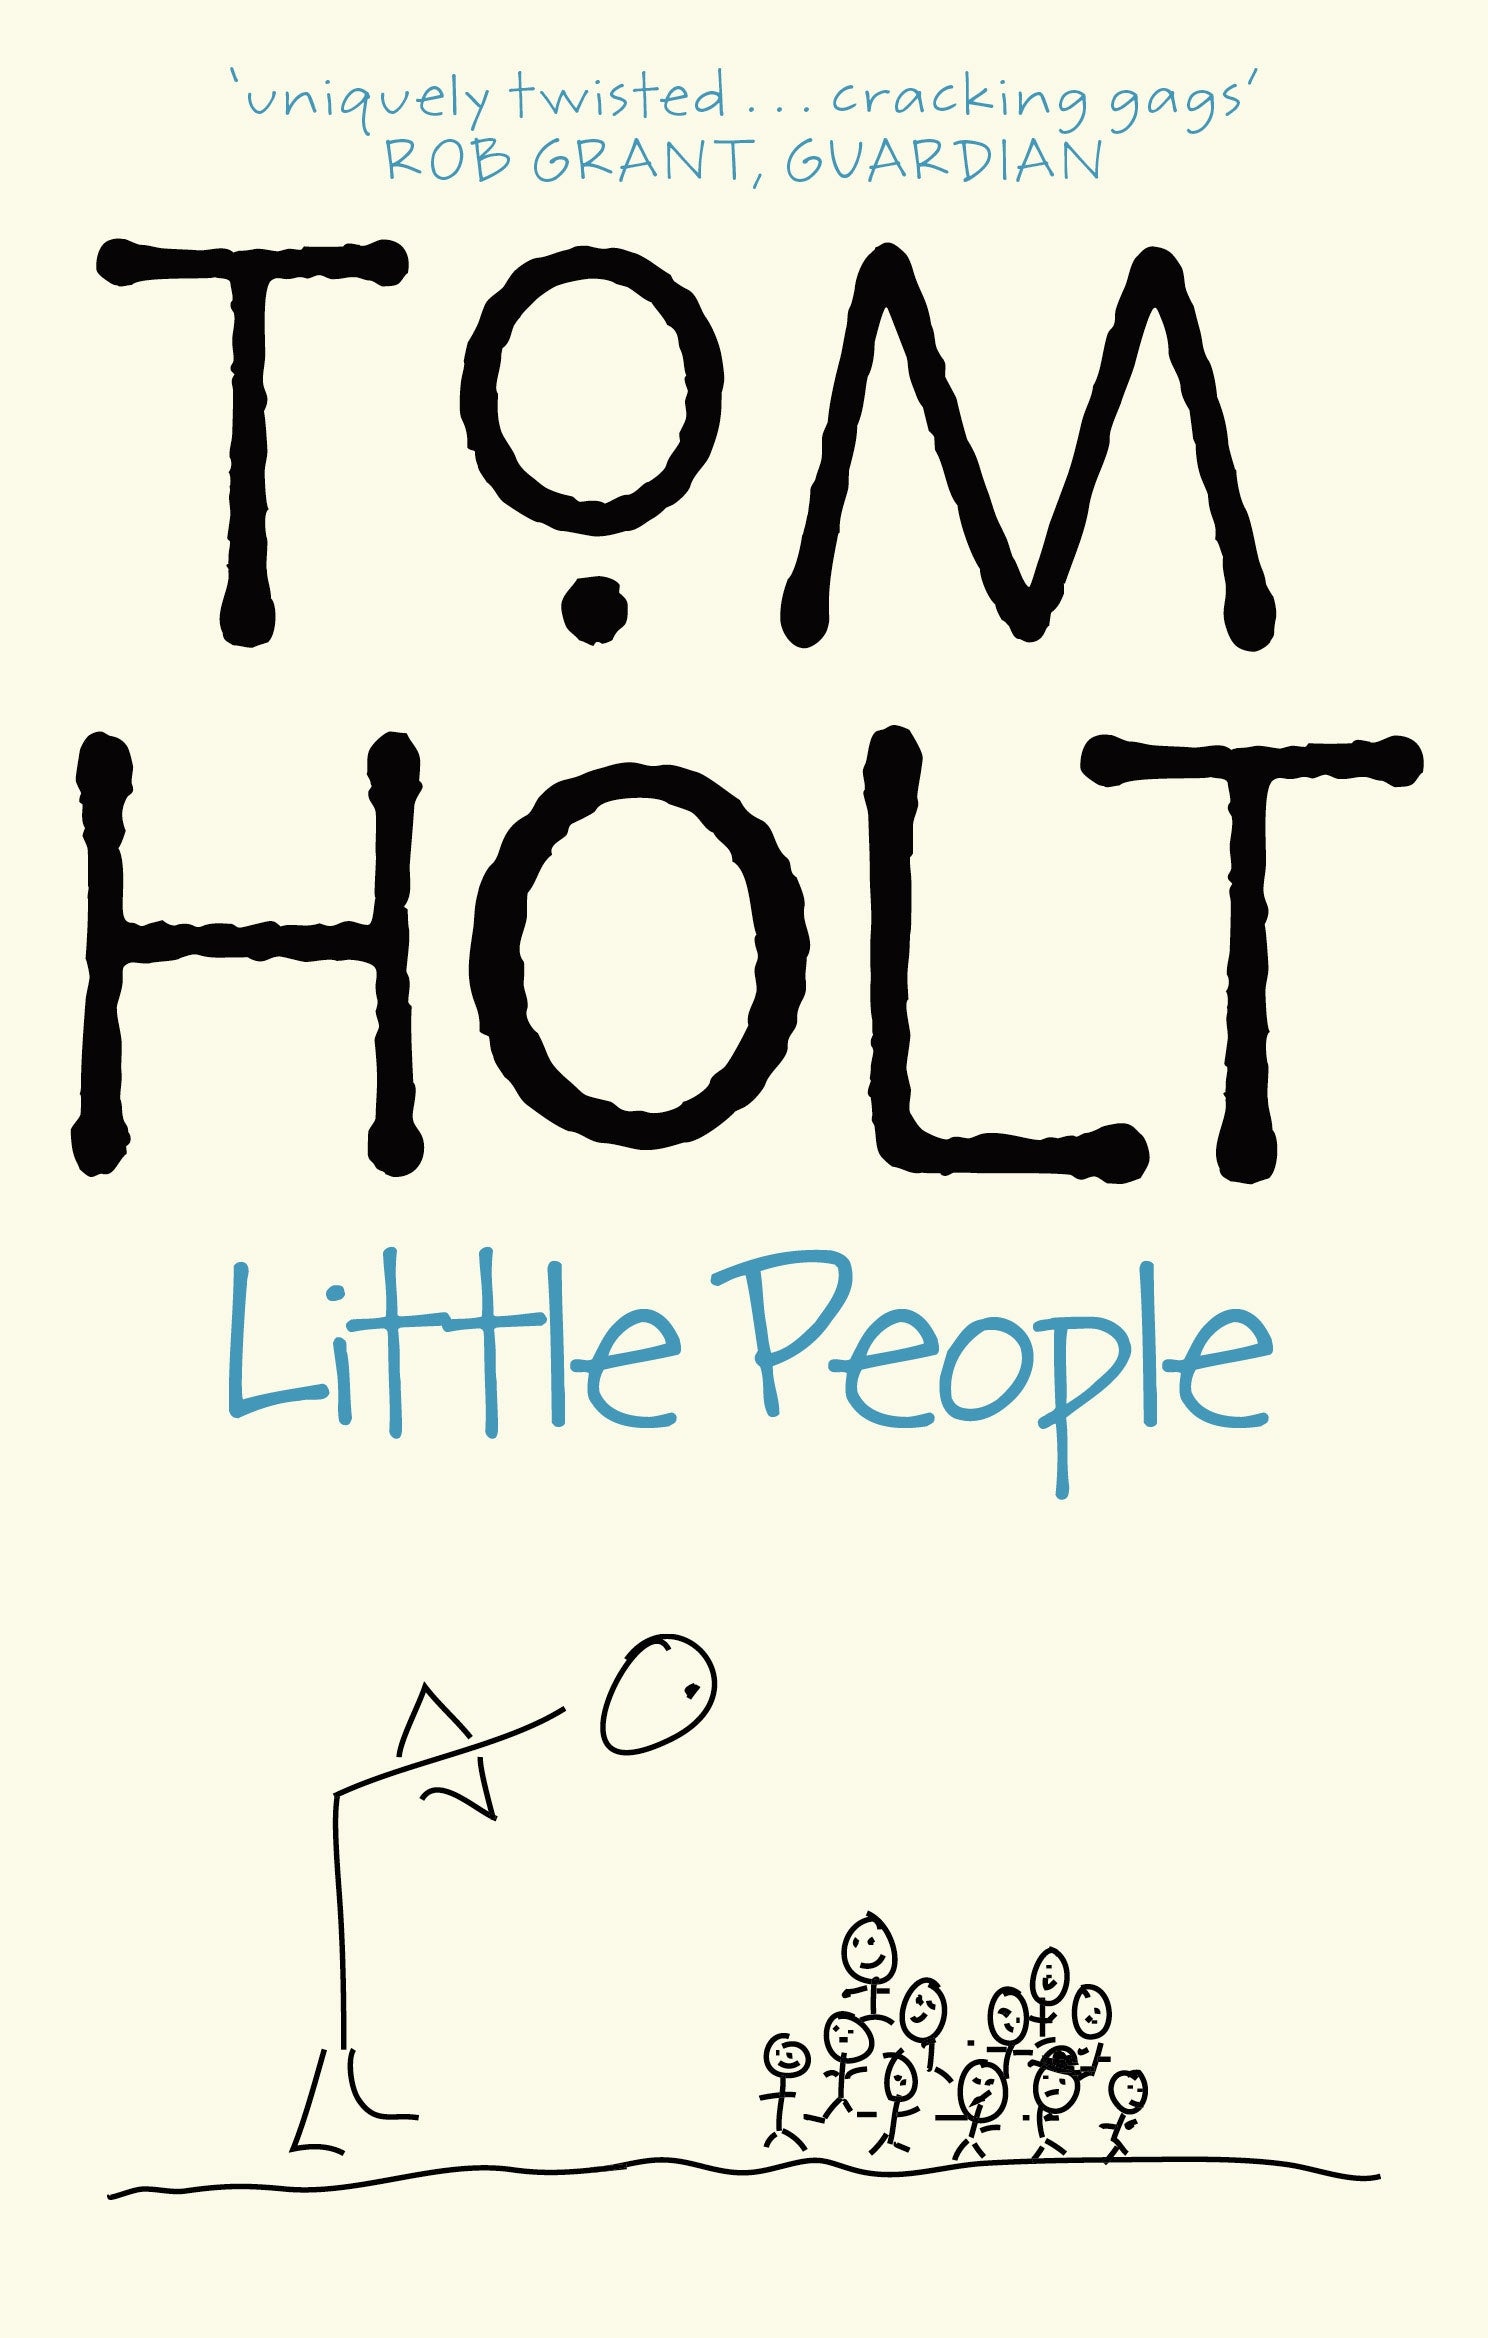 Little People by Tom Holt